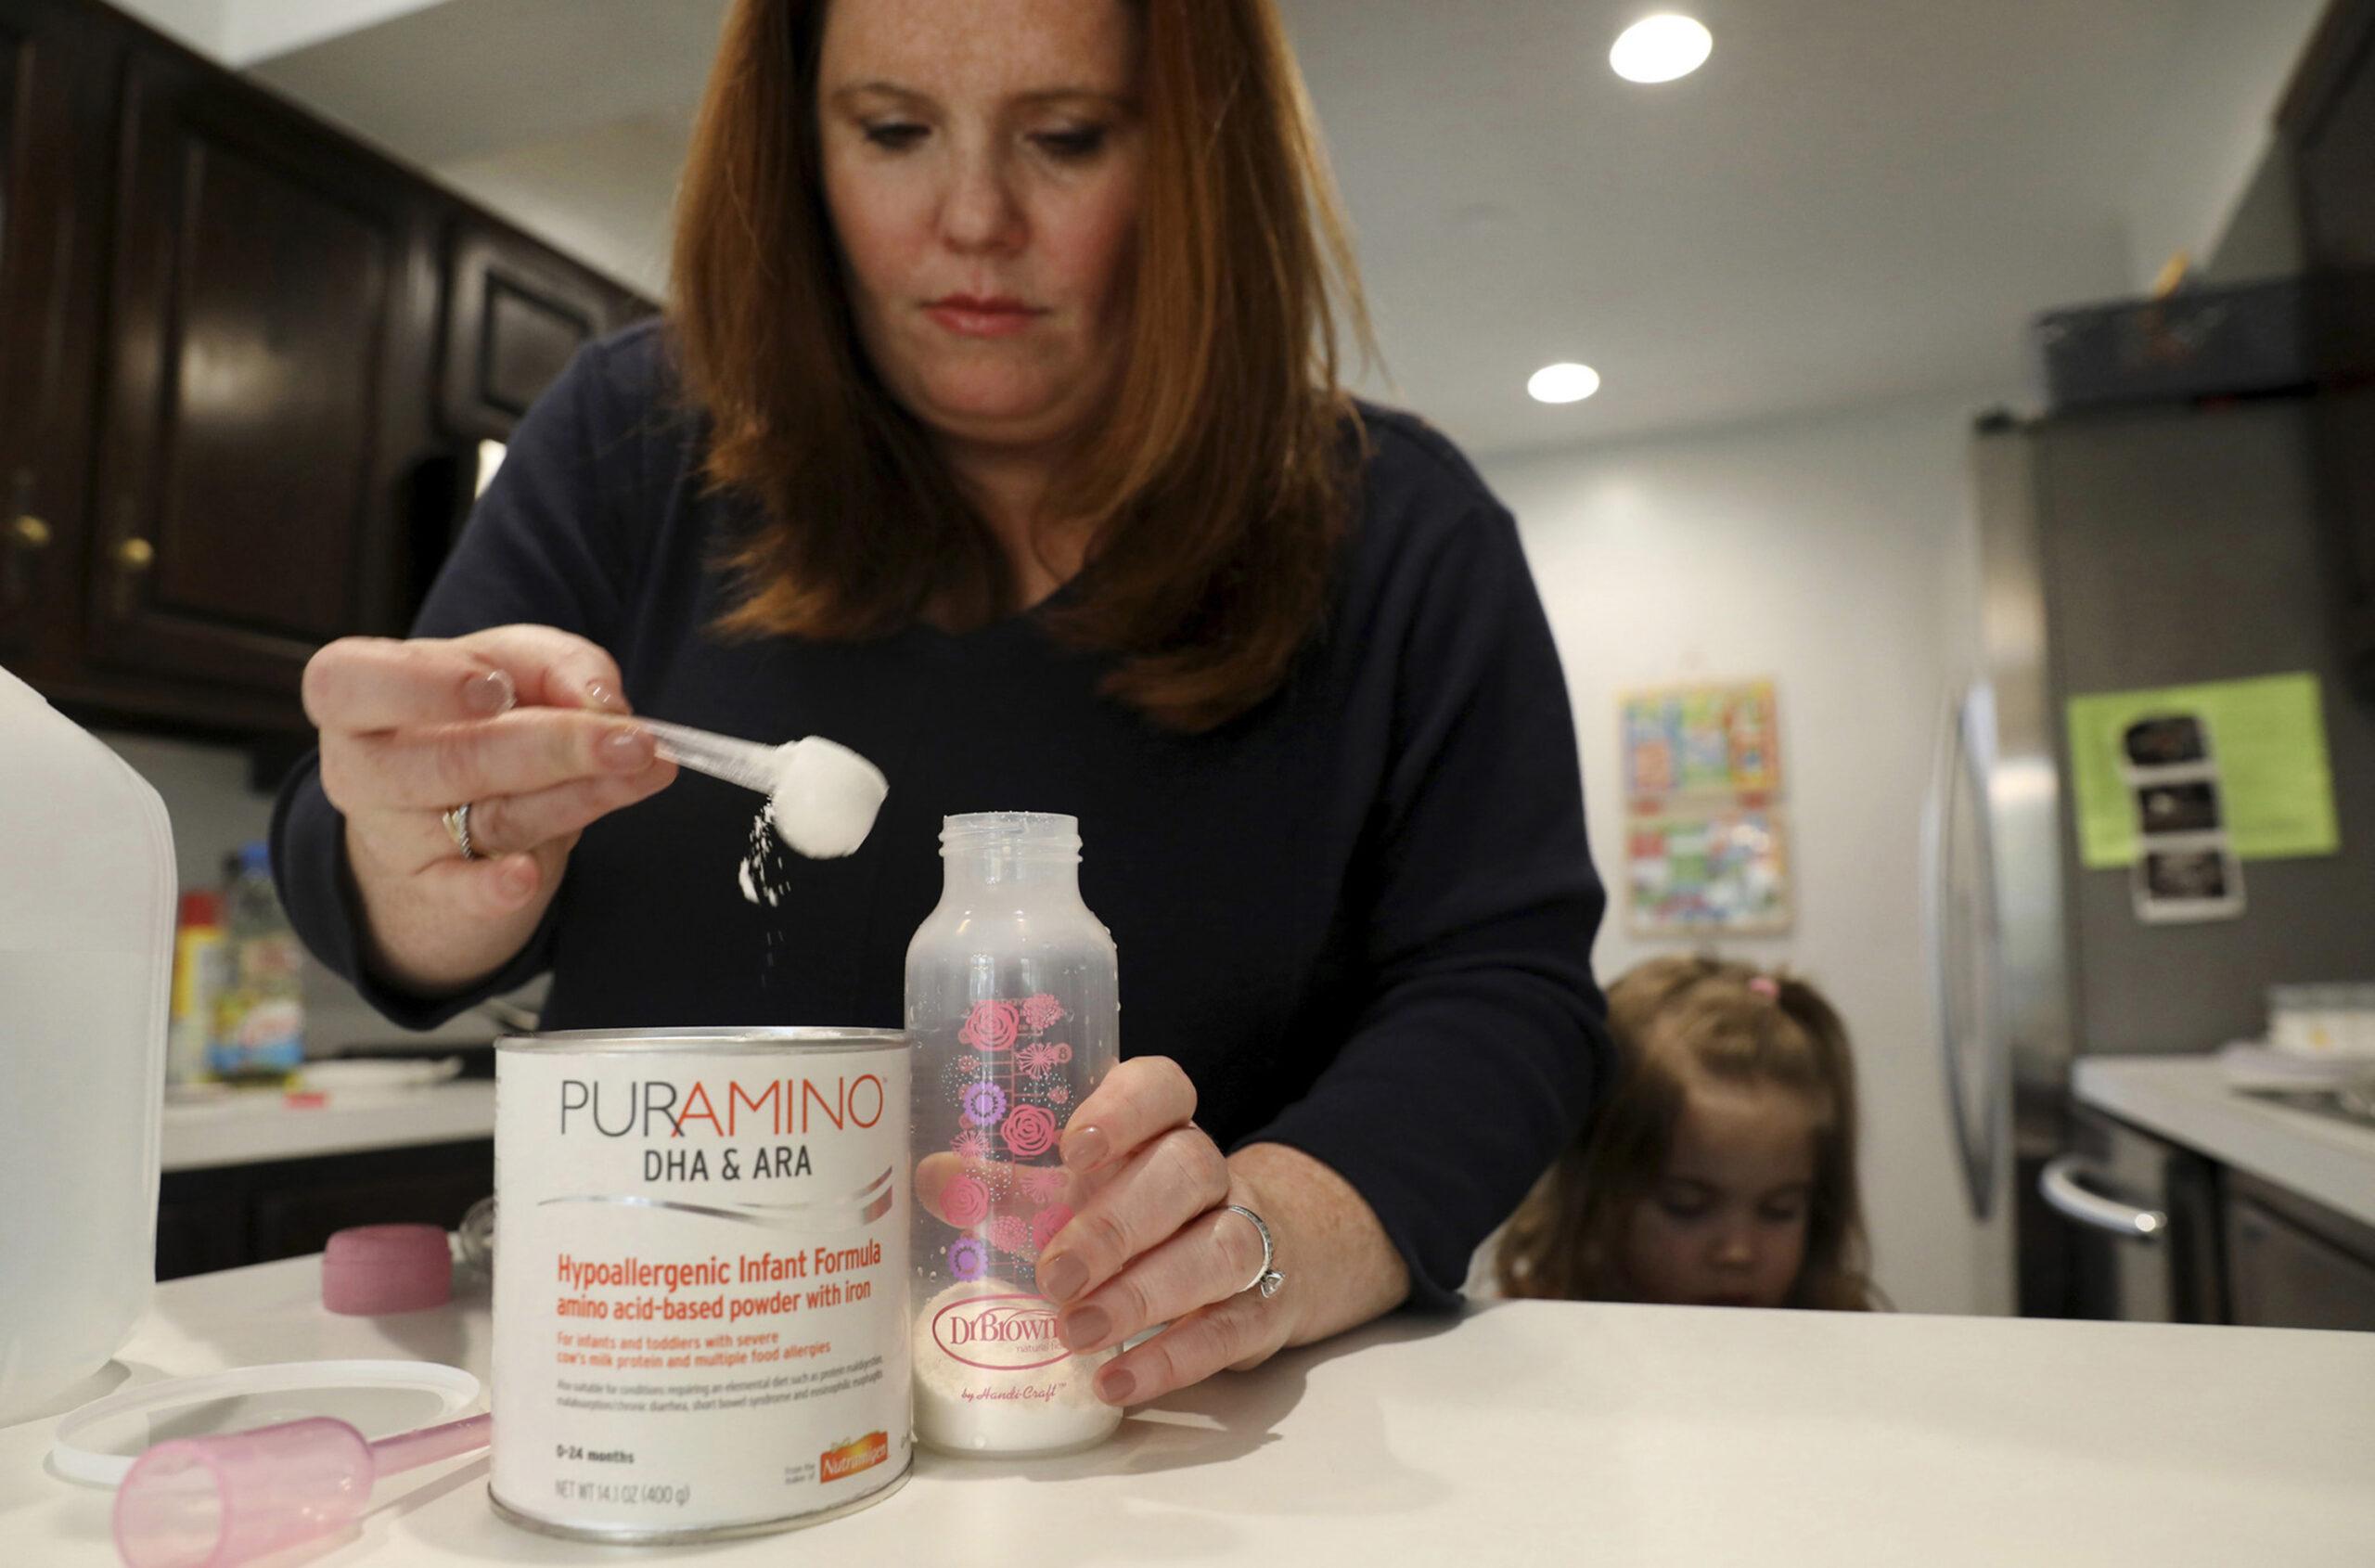 Ashley Strom prepares a bottle of PurAmino formula for her daughter Chloe, 7 months, at their home in Northbrook, Illinois, on Thursday, May 5, 2022. Strom uses PurAmino due to a Chloe&apos;s dairy intolerance, but because of a shortage of formula, it&apos;s been difficult for Ashley and other parents to acquire the necessary products.